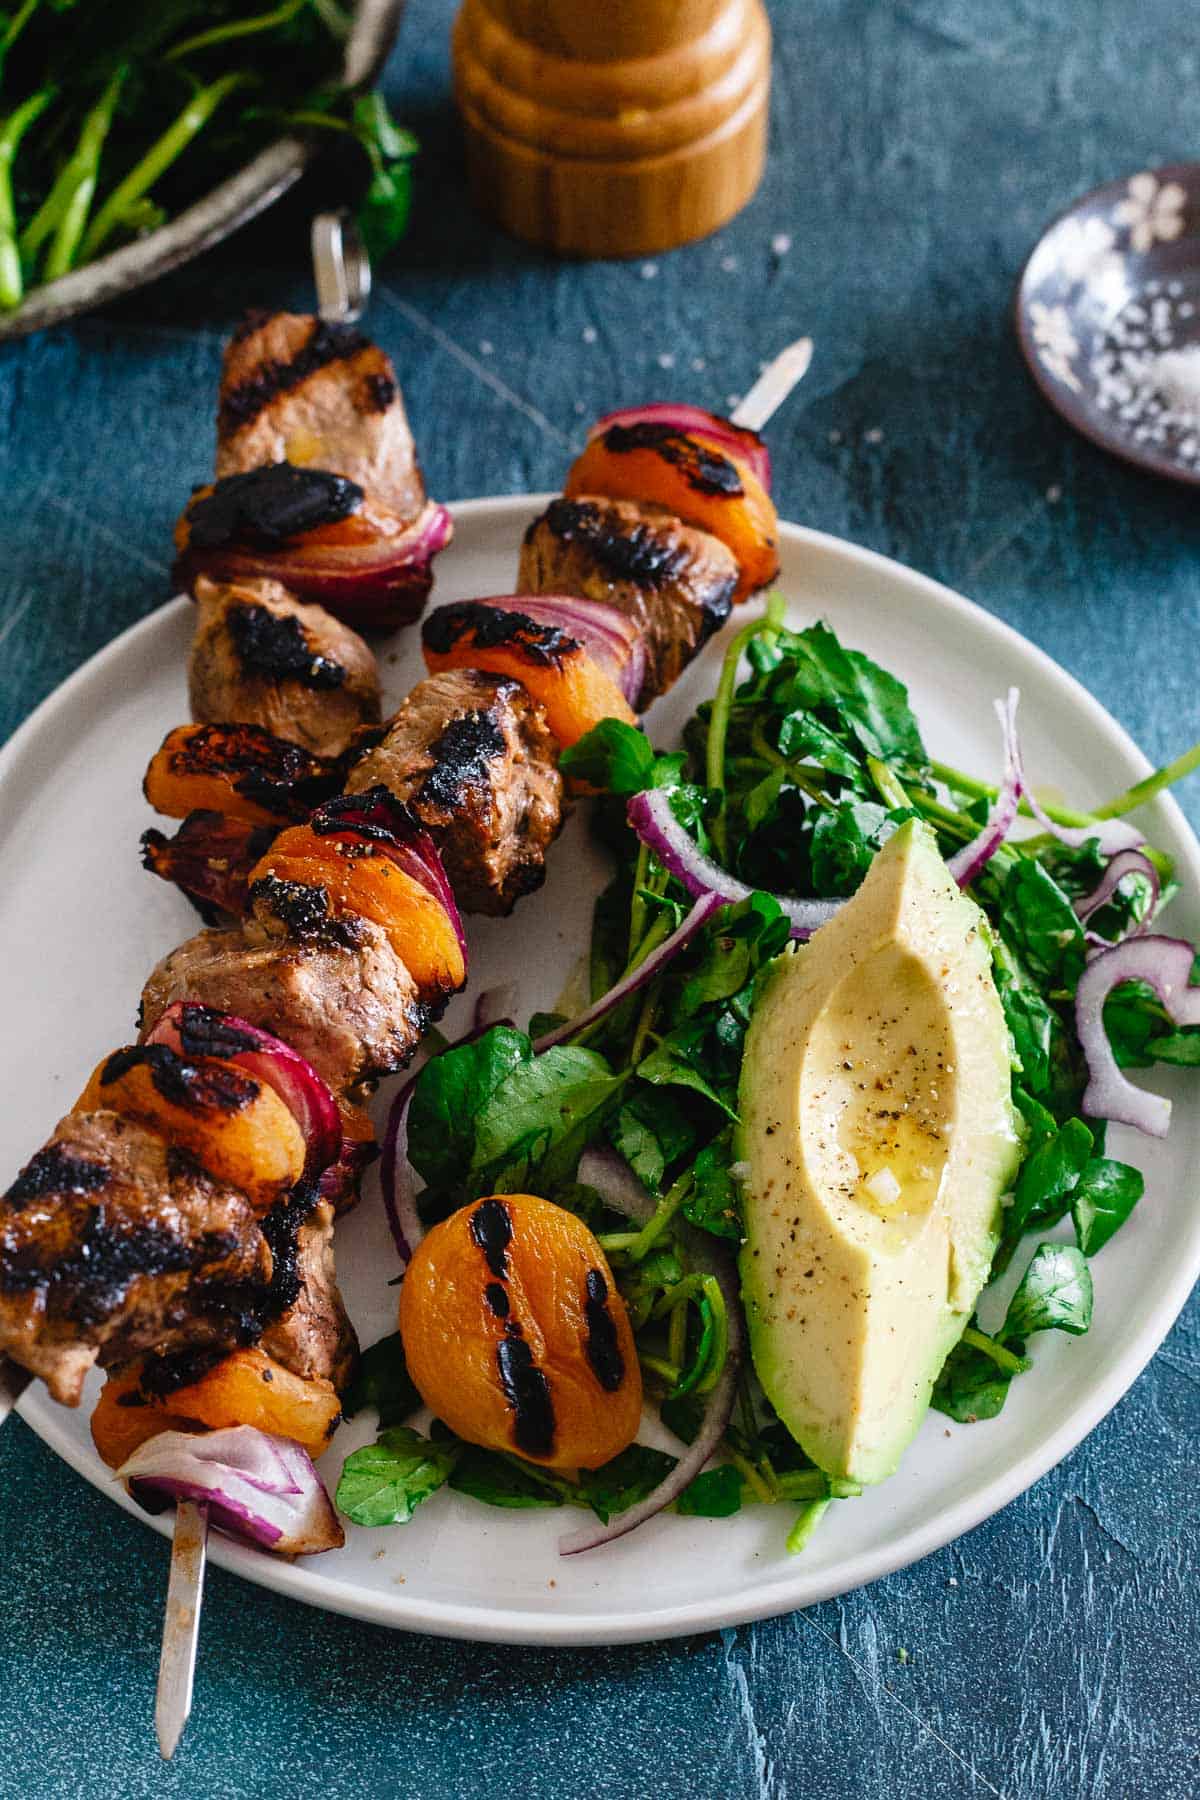 Sweet, plump apricots go perfectly with these smoky grilled lamb kebabs in this simple spring meal.